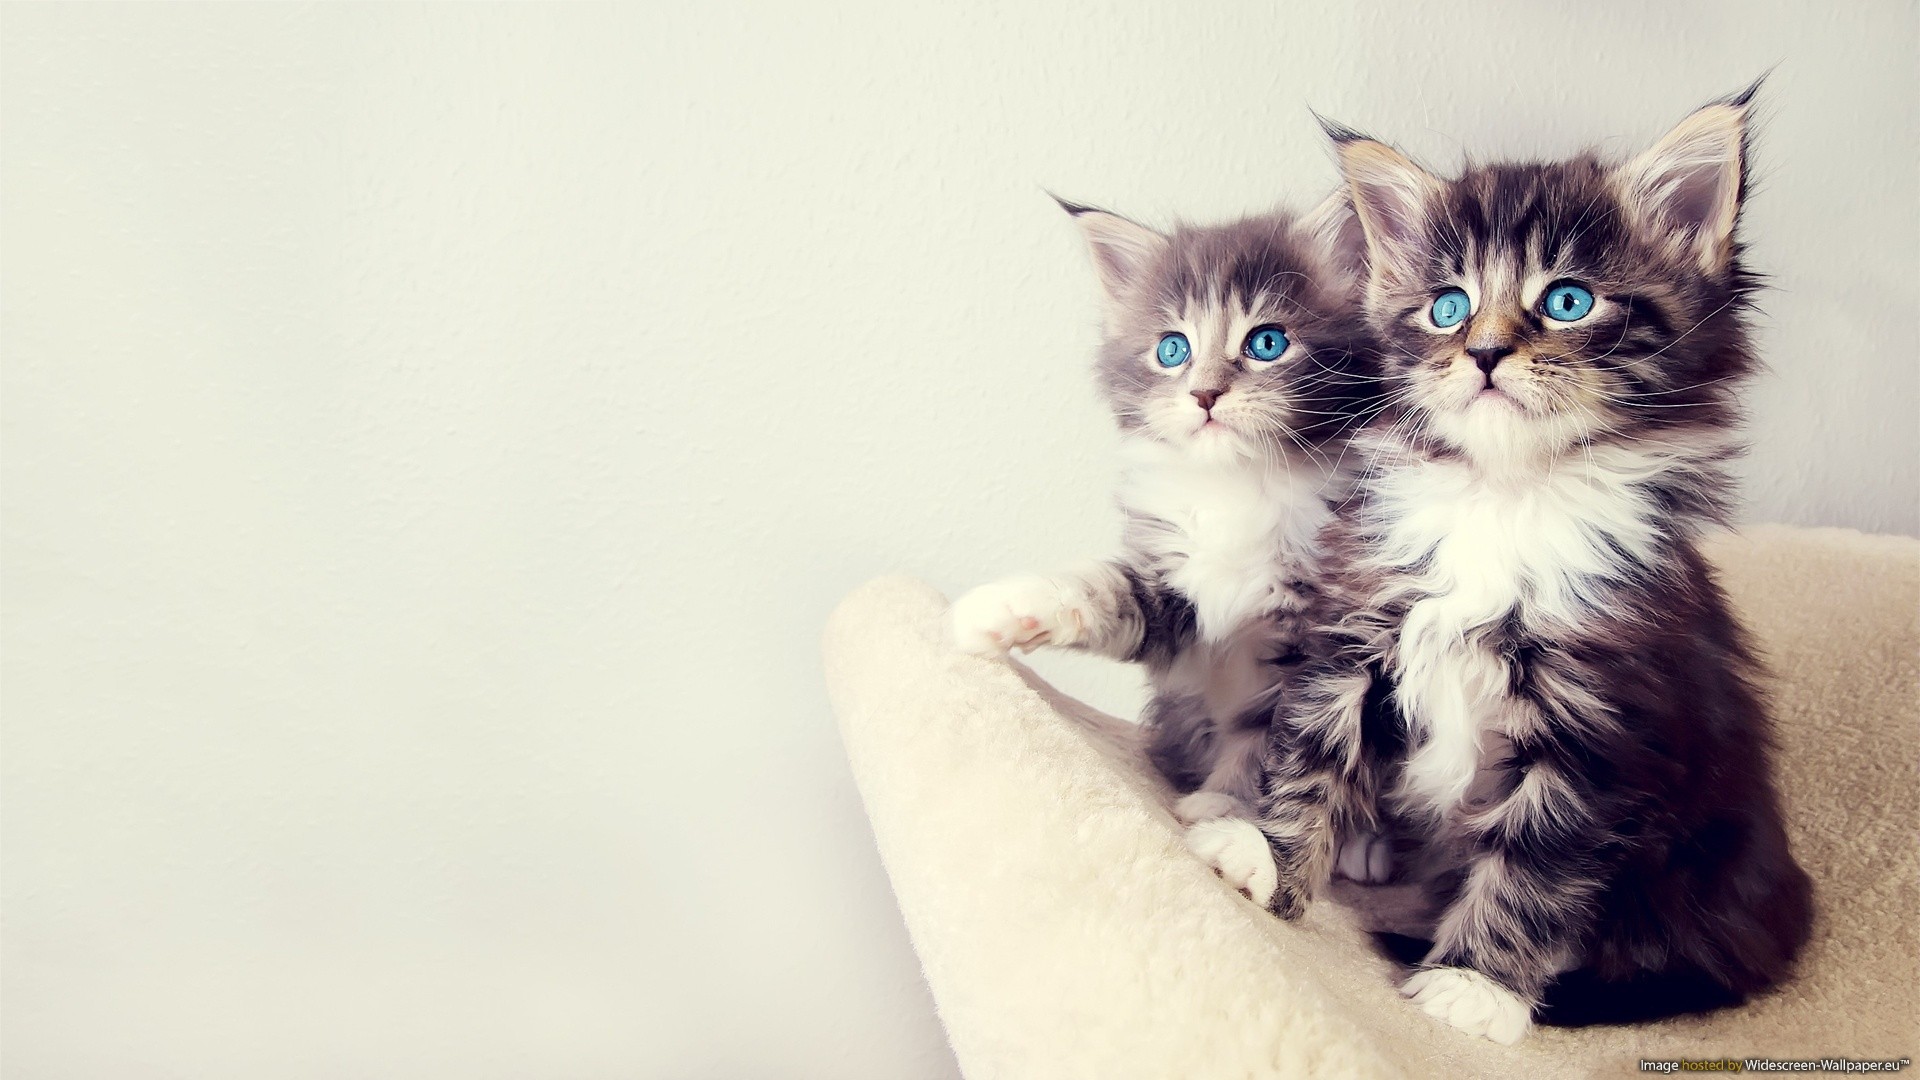 blue, White, Cats, Blue, Eyes, Animals, Gray, Sitting, Kittens, Chest, Paws, Furry Wallpaper